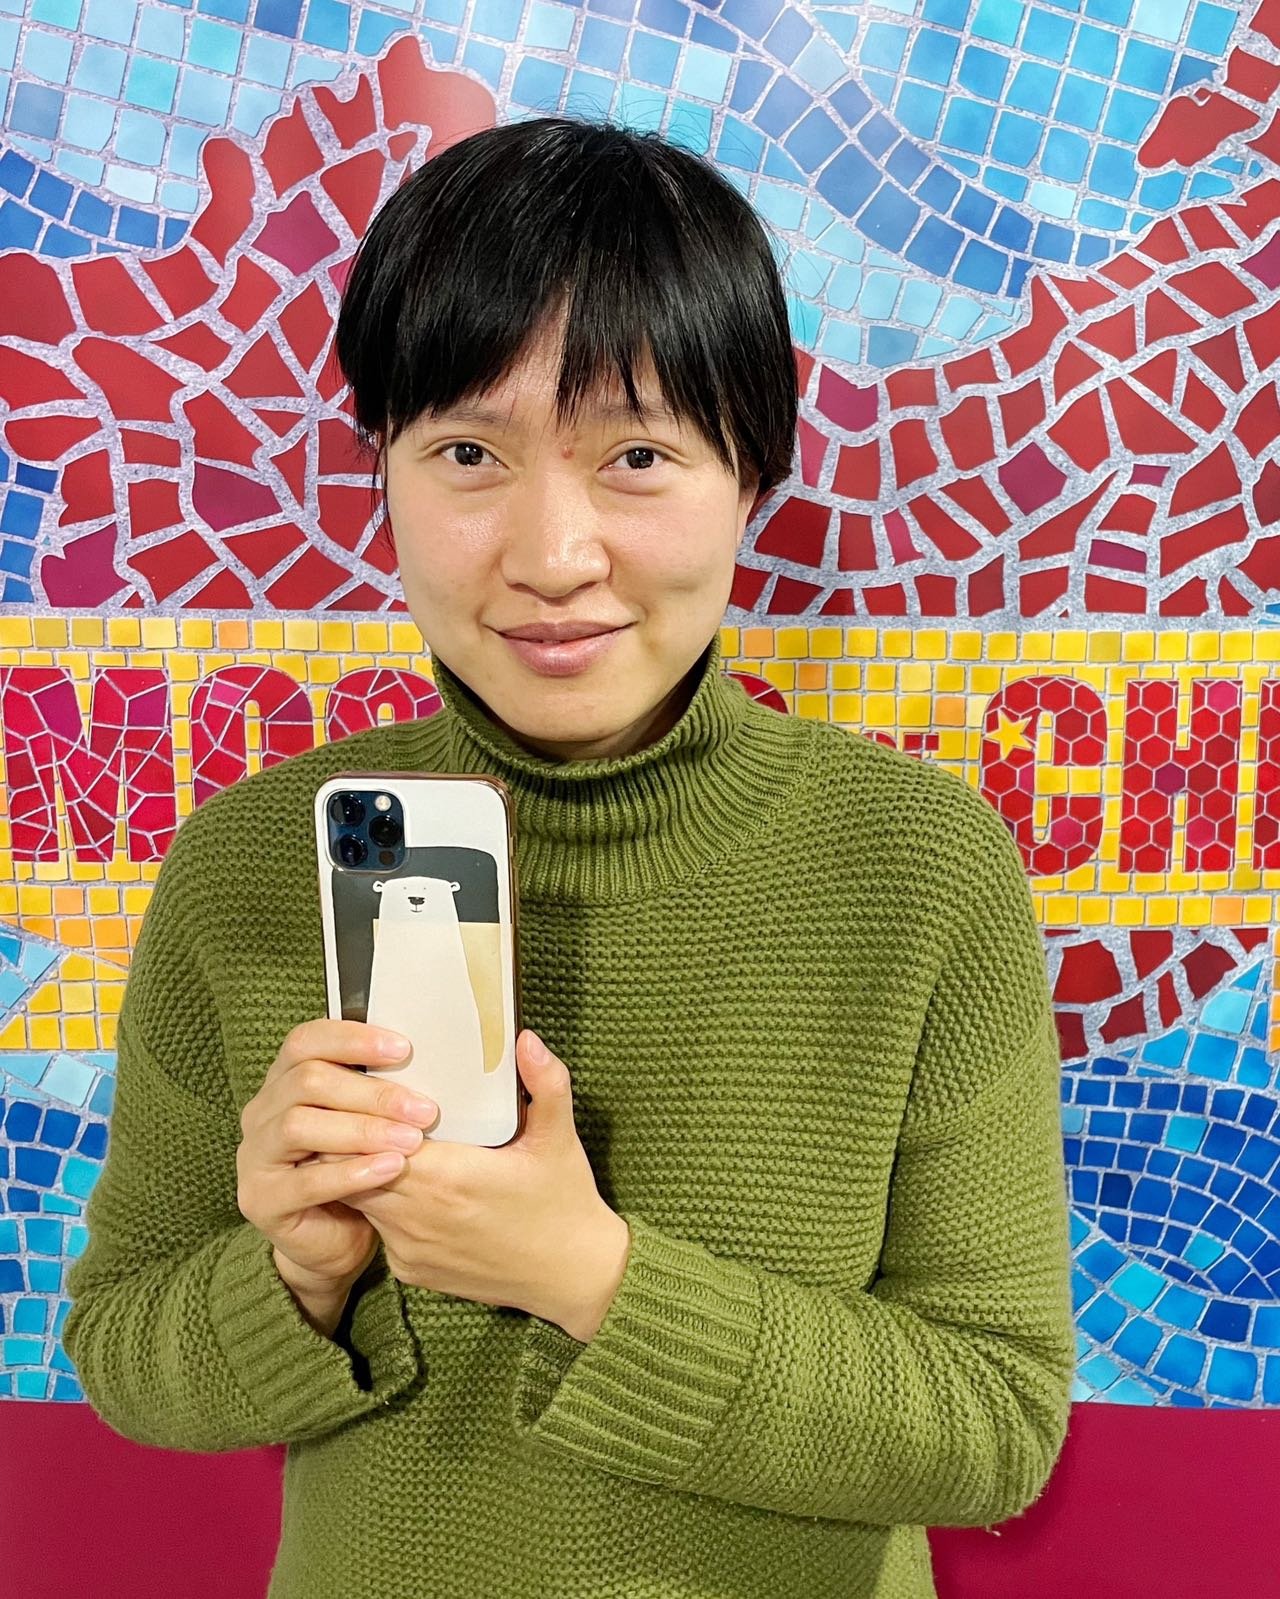 Zhou Yan's object: Her phone, symbolising the things she wish didn't define her life so much.